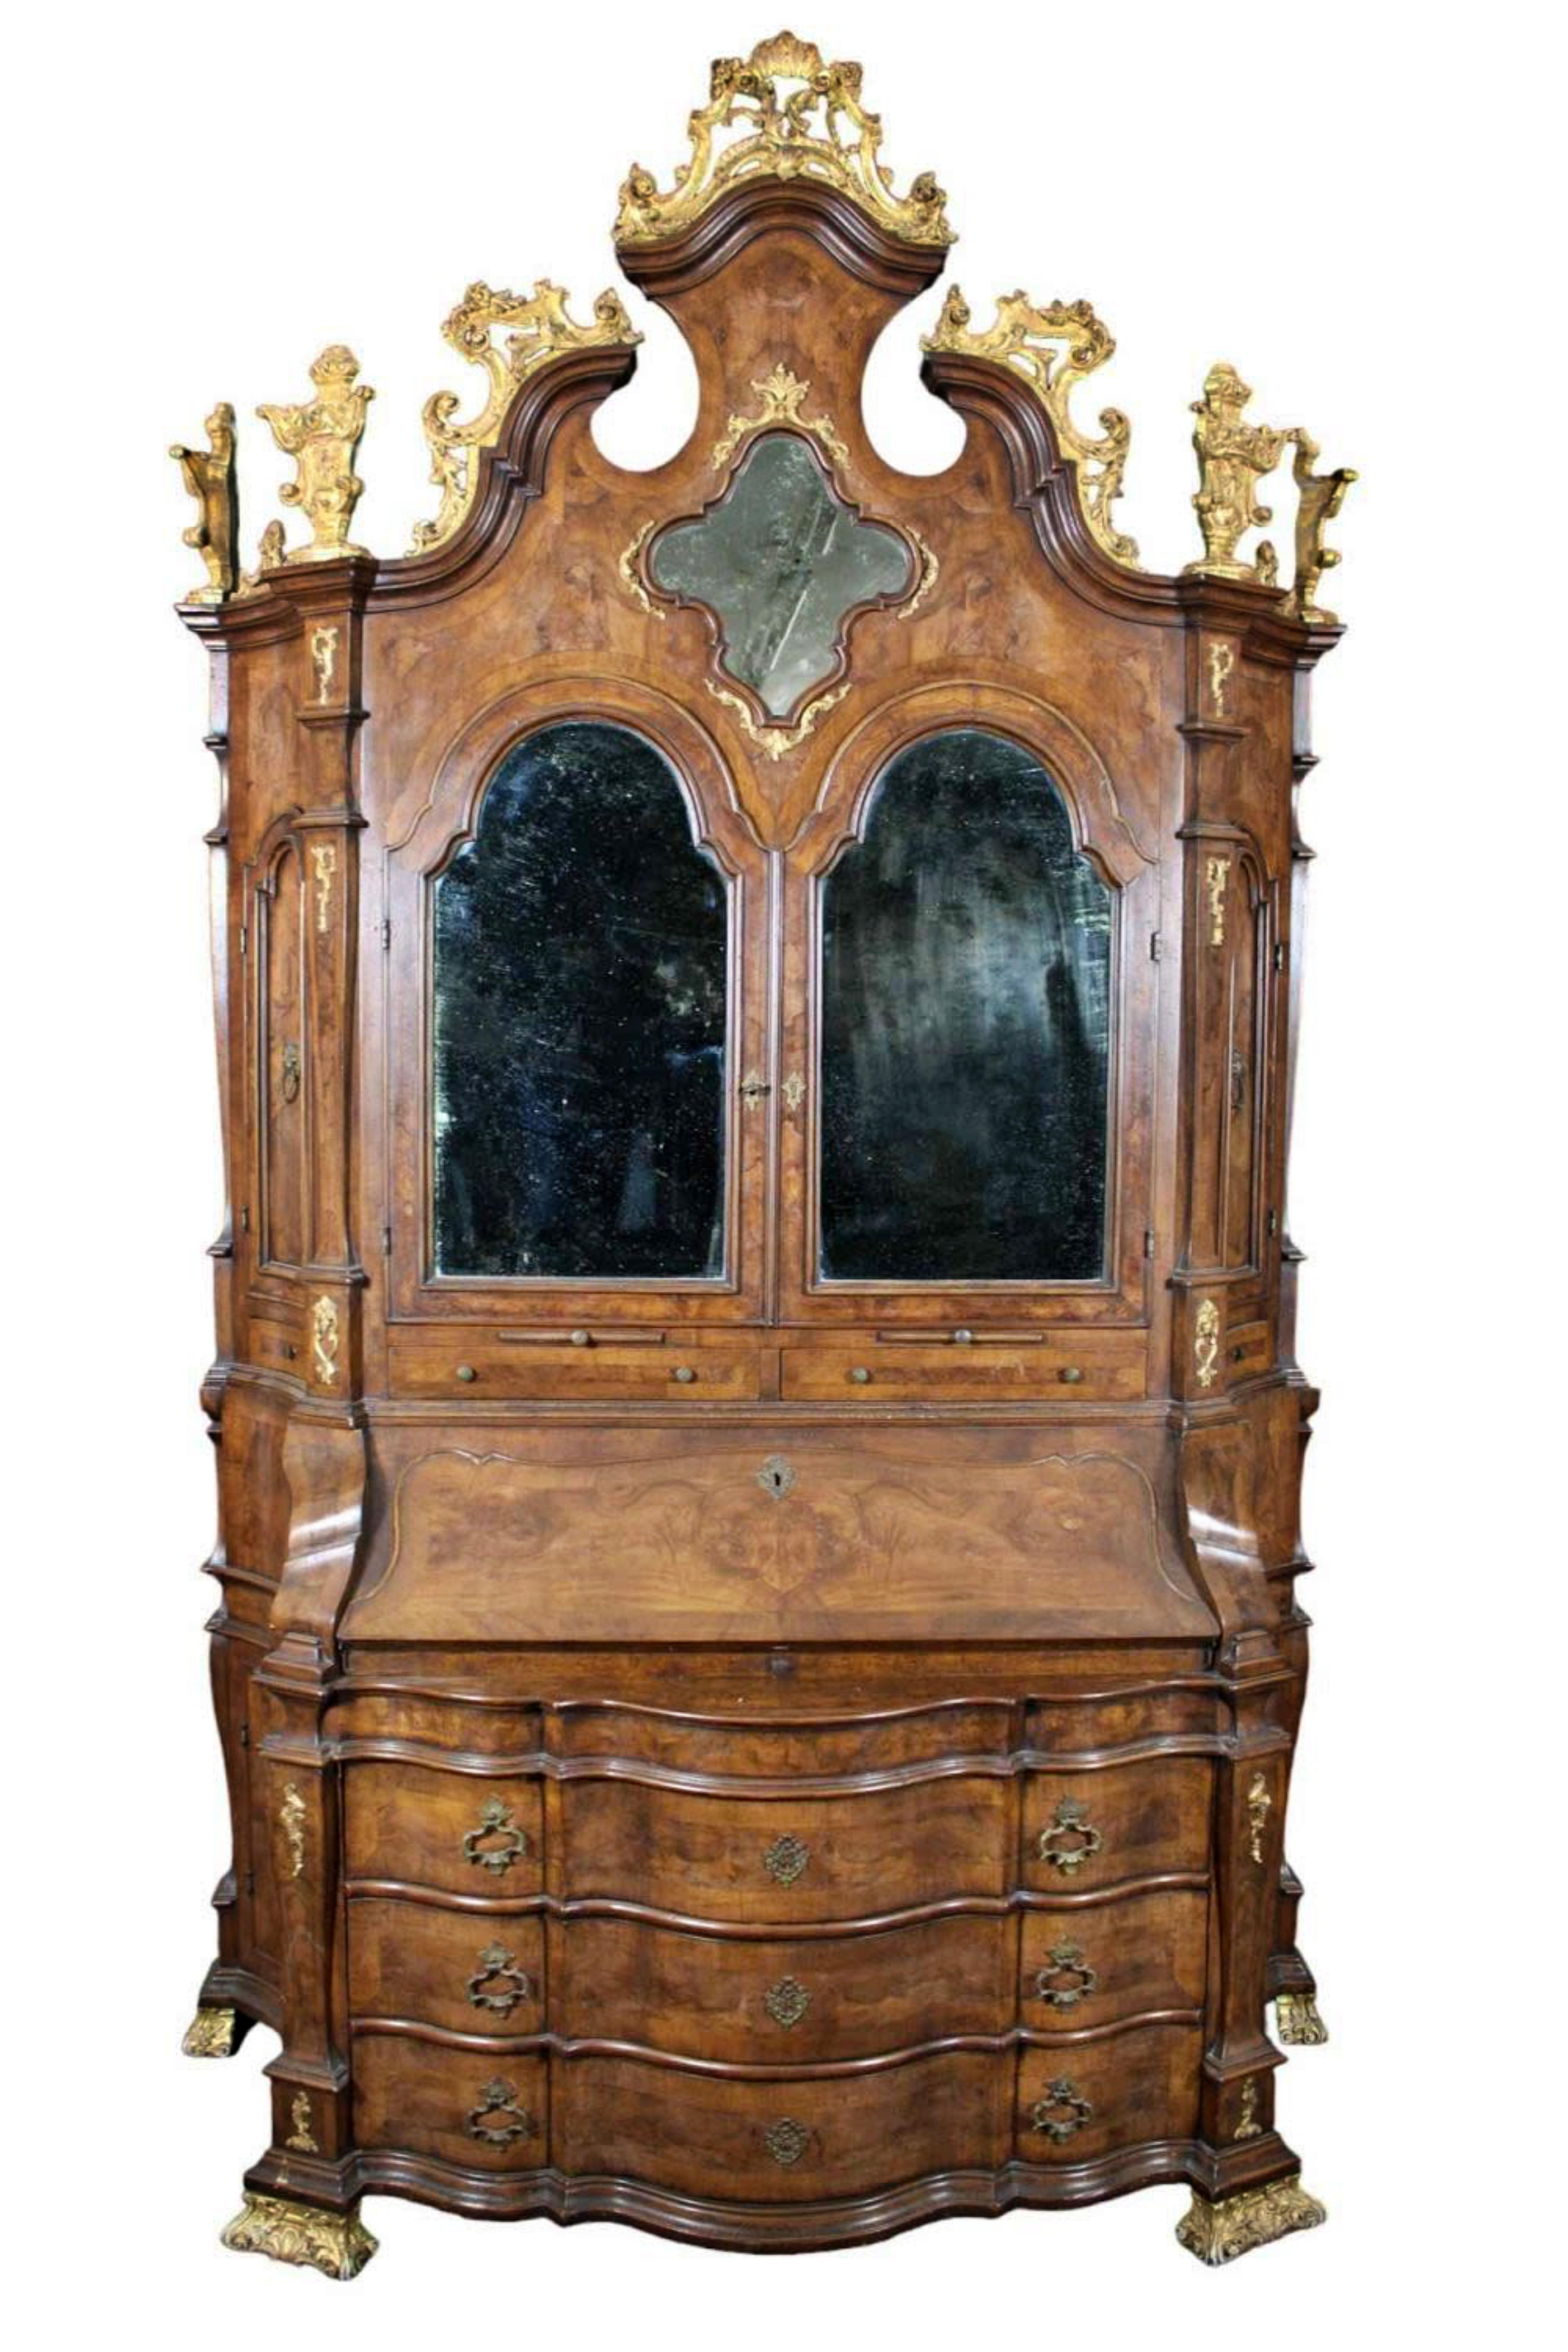 Hand-Crafted MAGNIFICENT ELEGANT VENETIAN TRUMEAU 19th Century For Sale